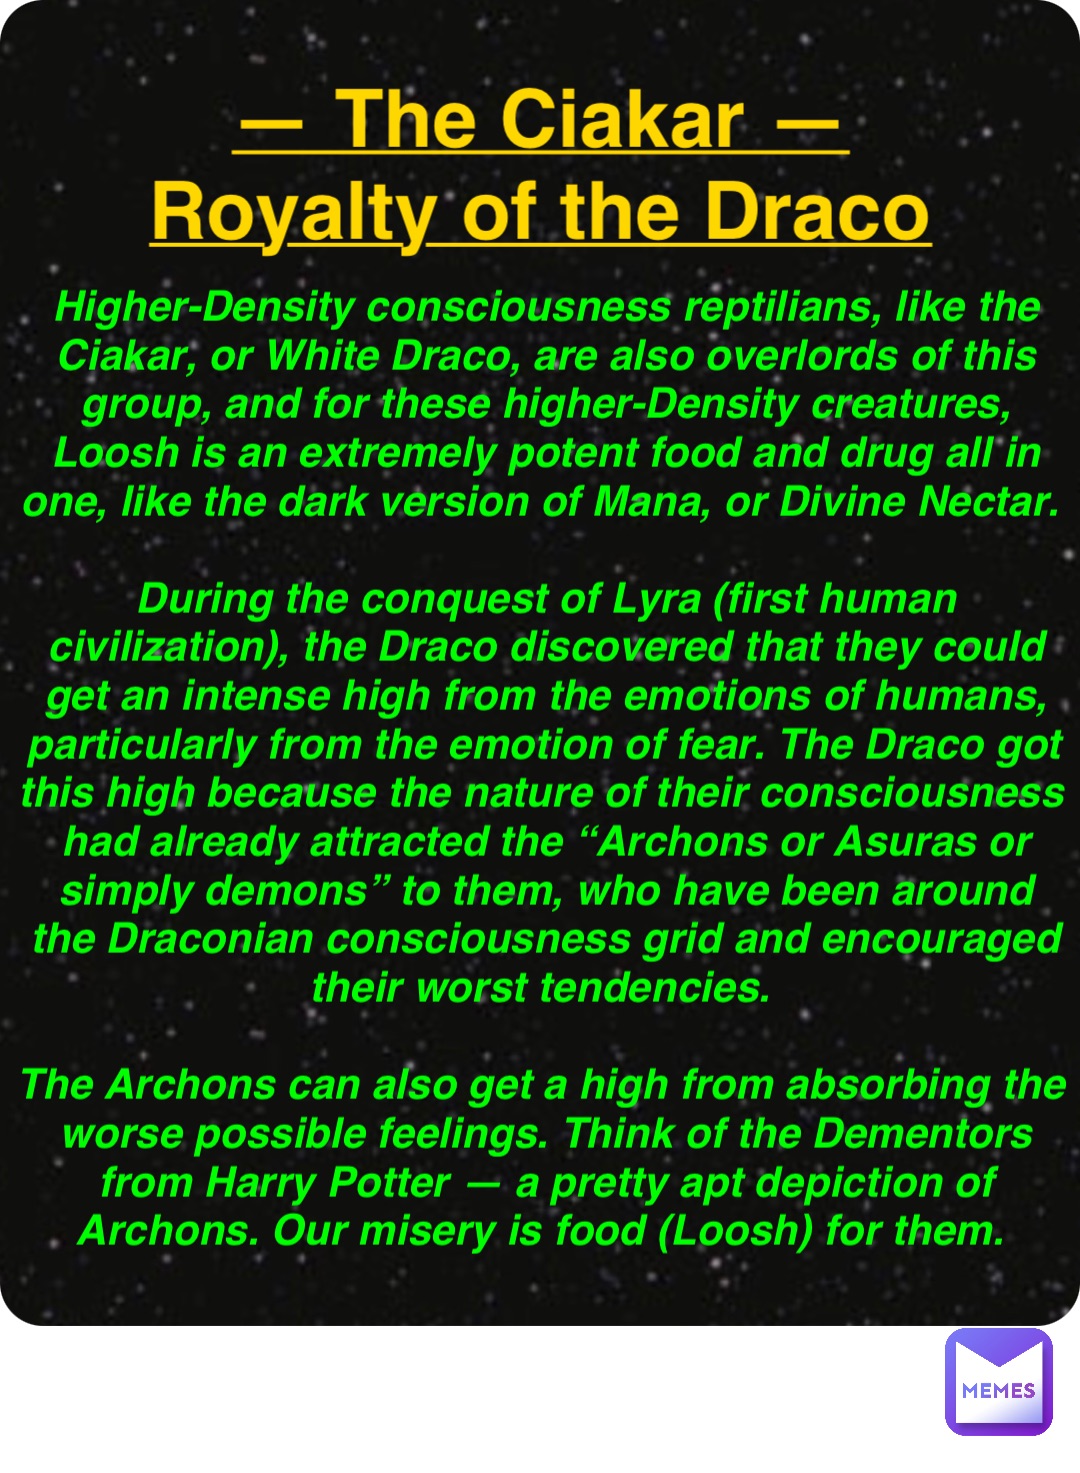 Double tap to edit — The Ciakar —
Royalty of the Draco Higher-Density consciousness reptilians, like the Ciakar, or White Draco, are also overlords of this group, and for these higher-Density creatures, Loosh is an extremely potent food and drug all in one, like the dark version of Mana, or Divine Nectar.

During the conquest of Lyra (first human civilization), the Draco discovered that they could get an intense high from the emotions of humans, particularly from the emotion of fear. The Draco got this high because the nature of their consciousness had already attracted the “Archons or Asuras or simply demons” to them, who have been around the Draconian consciousness grid and encouraged their worst tendencies.

The Archons can also get a high from absorbing the worse possible feelings. Think of the Dementors from Harry Potter — a pretty apt depiction of Archons. Our misery is food (Loosh) for them.